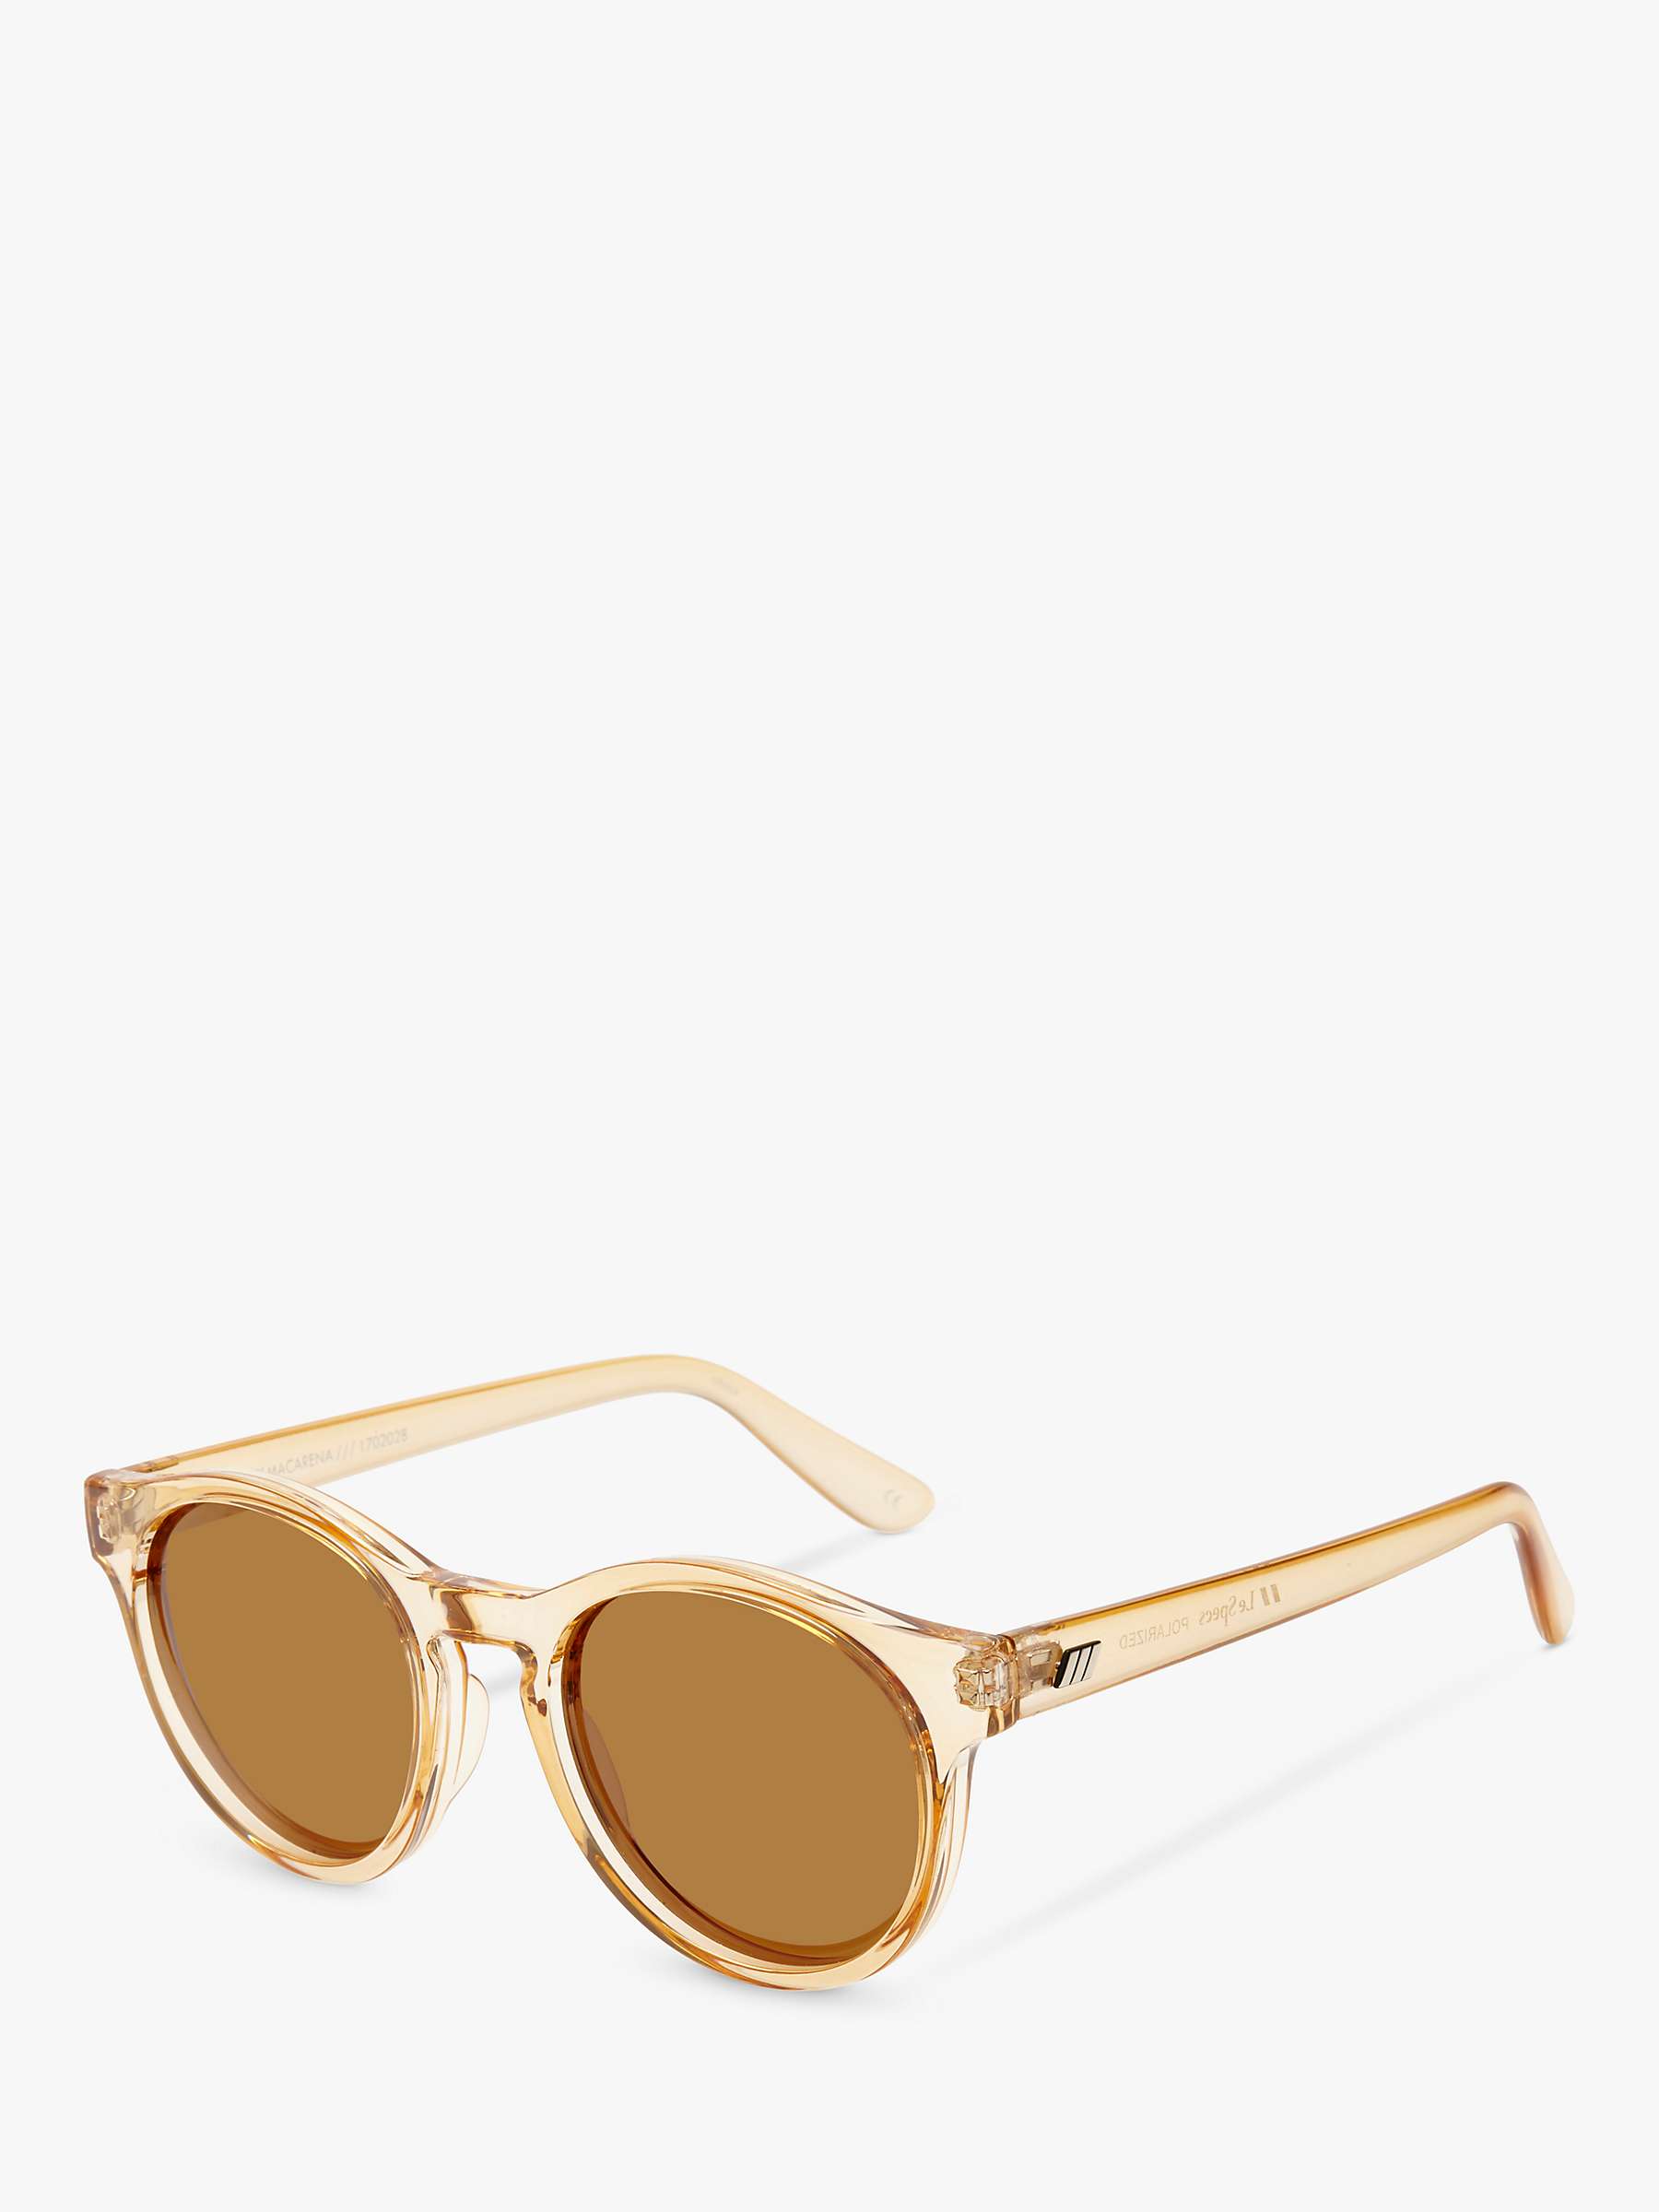 Buy Le Specs L5000173 Hey Macarena Polarised Round Sunglasses, Clear Brown/Tan Online at johnlewis.com